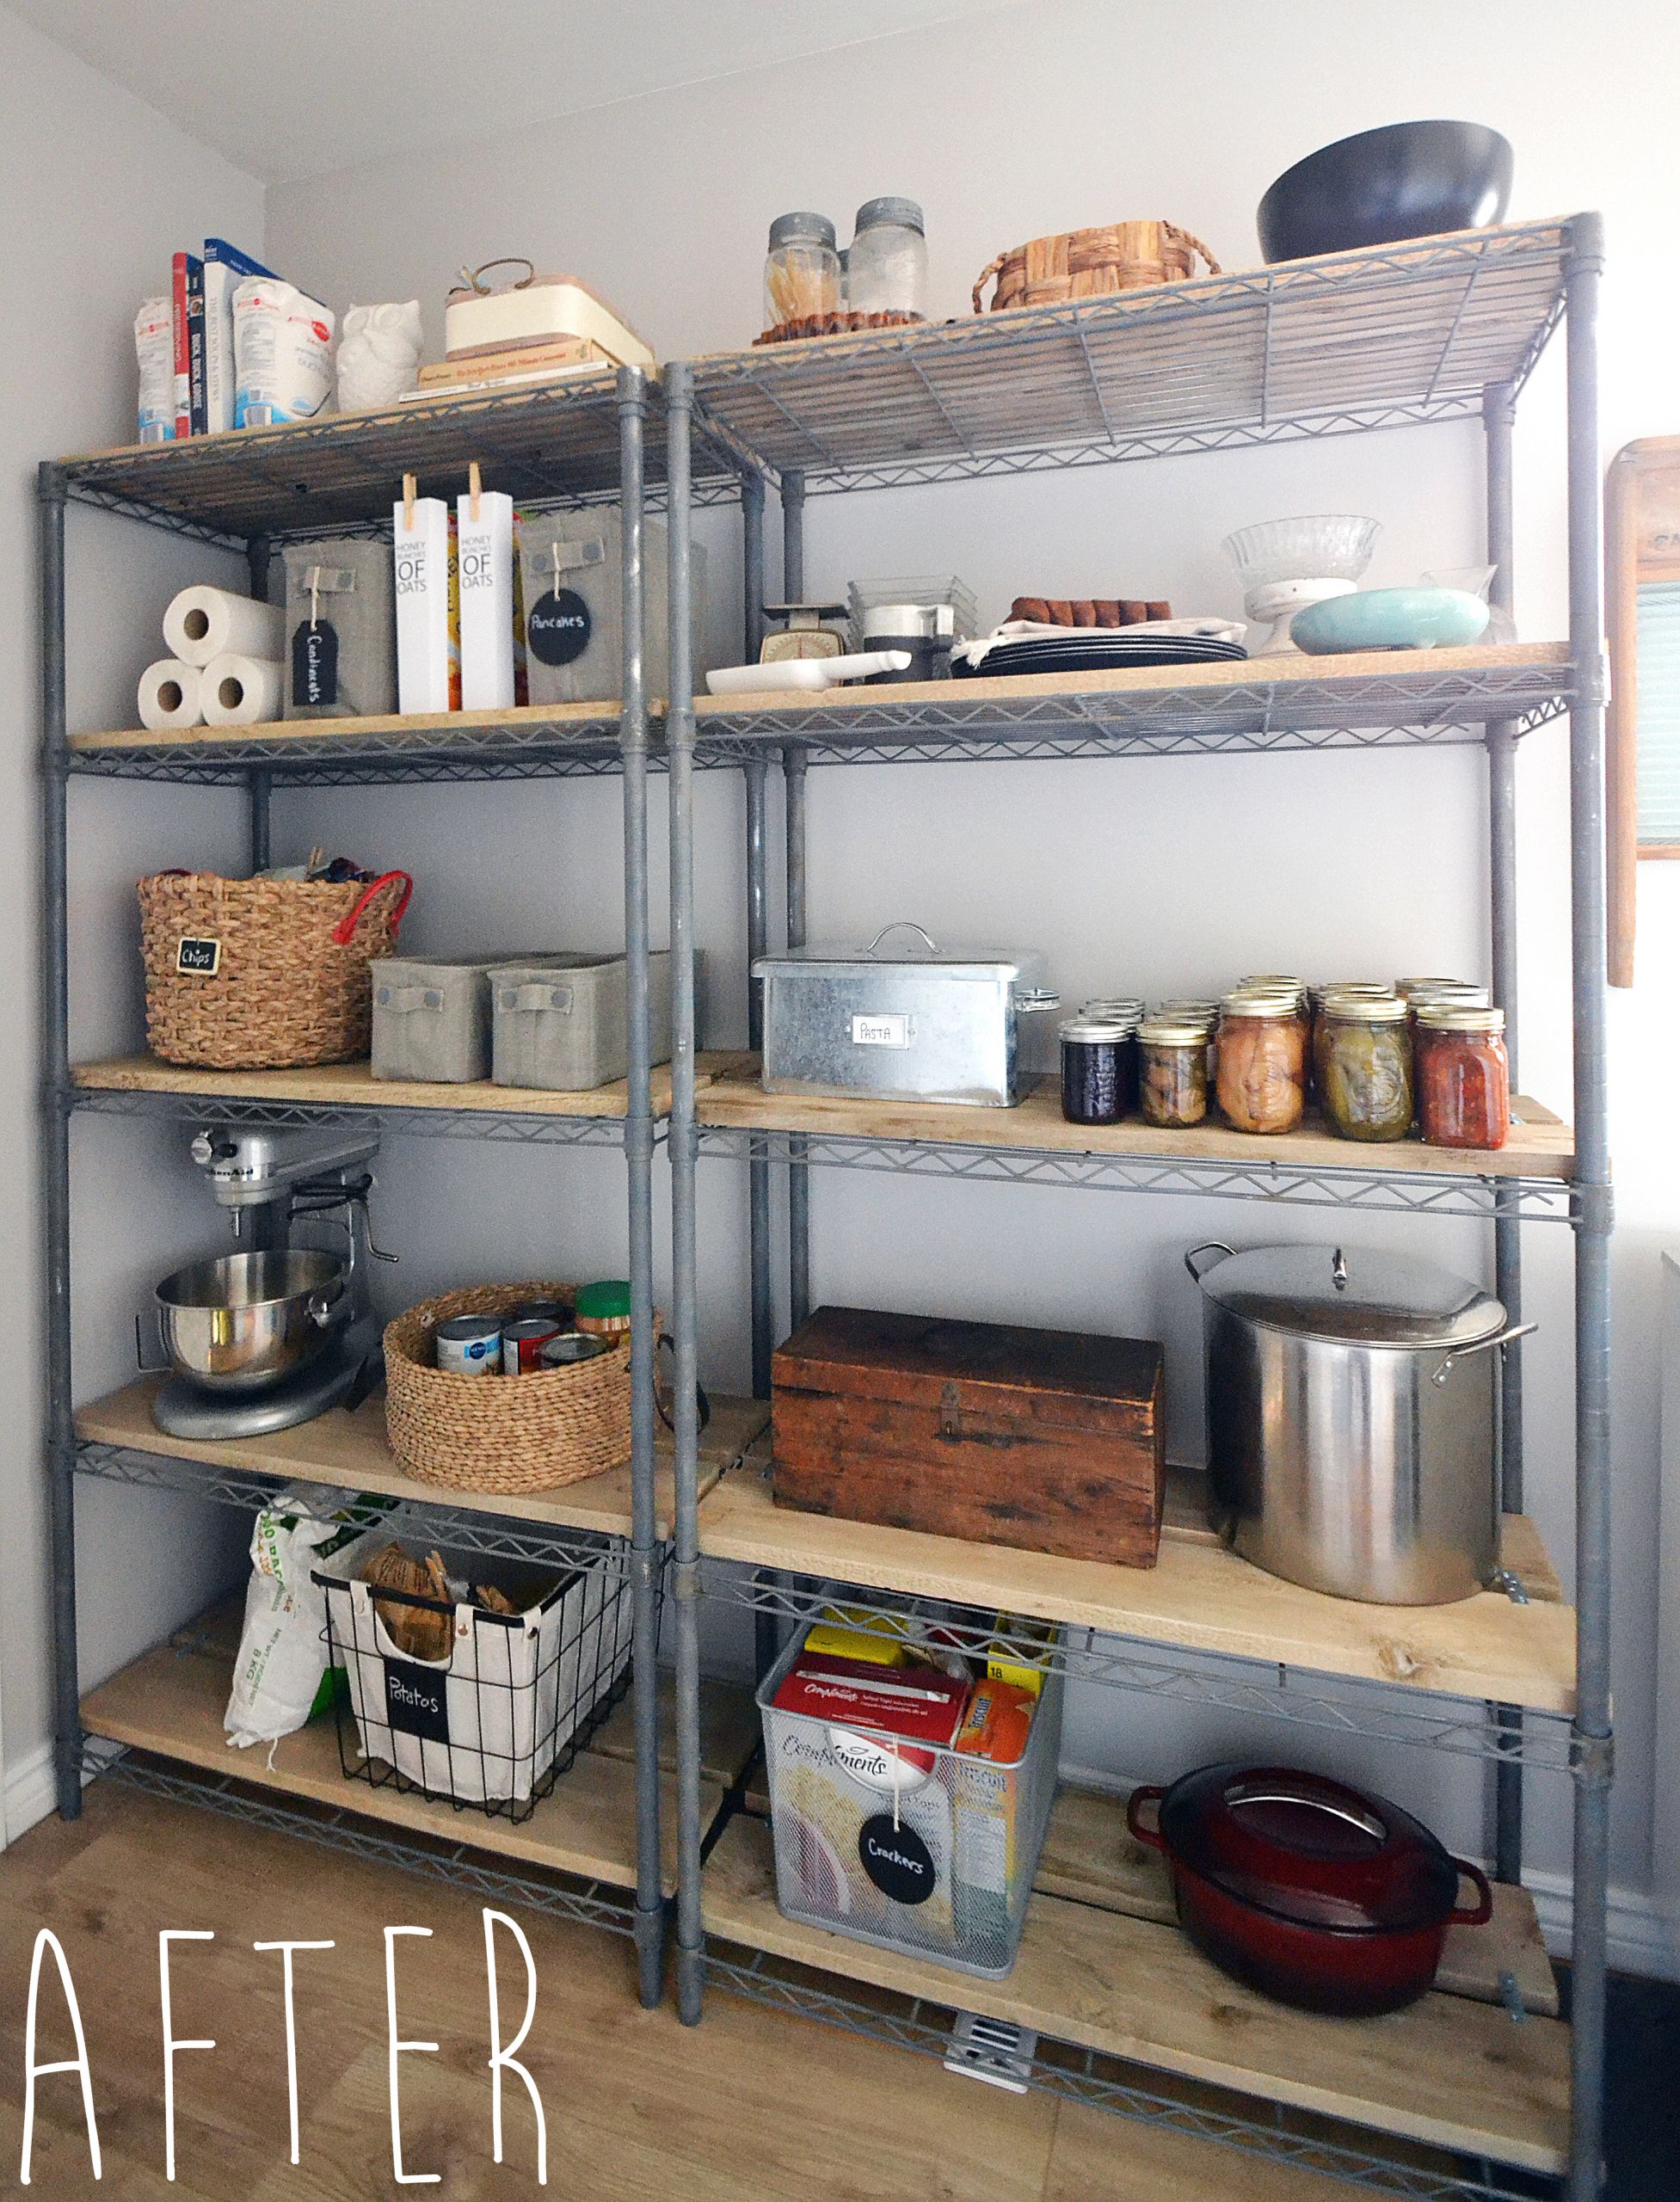 Kitchen Storage Racks Awesome the Crux How to Give Pantry Shelving Easy Rustic Charm